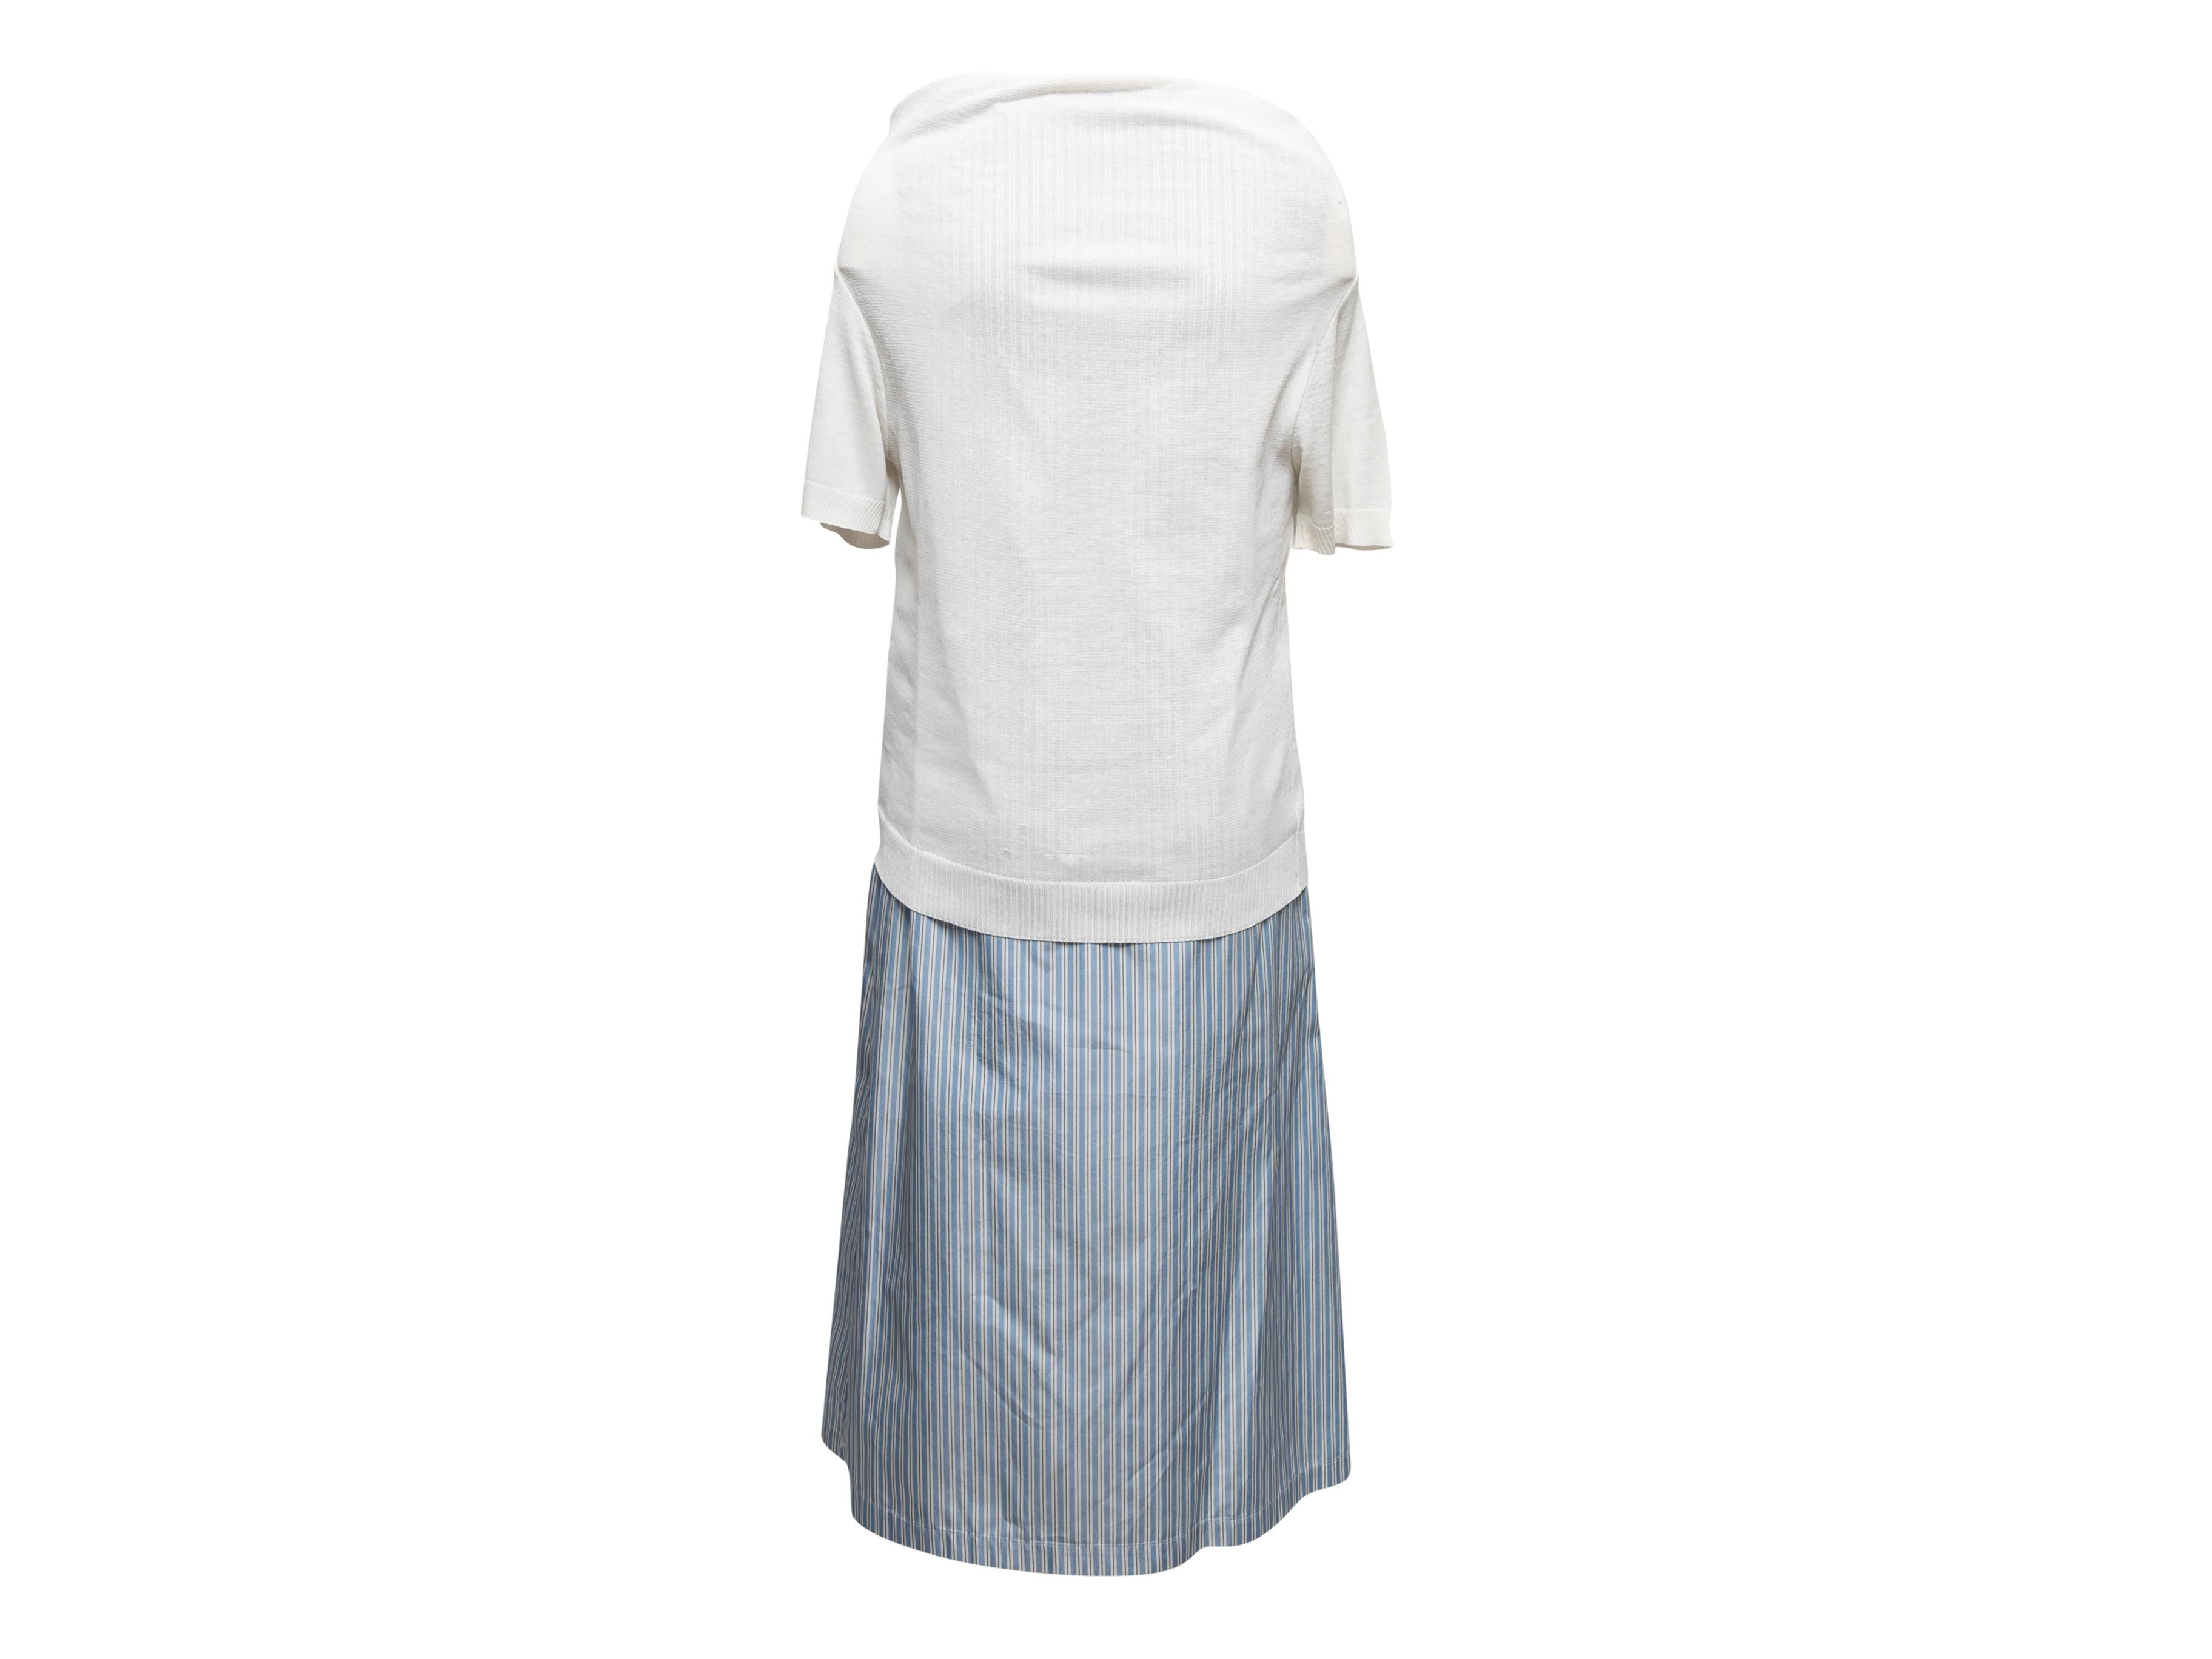 White and light blue pinstriped layered dress by Tricot Comme Des Garcons. Bateau neckline. Short sleeves. Button closures at front. 35